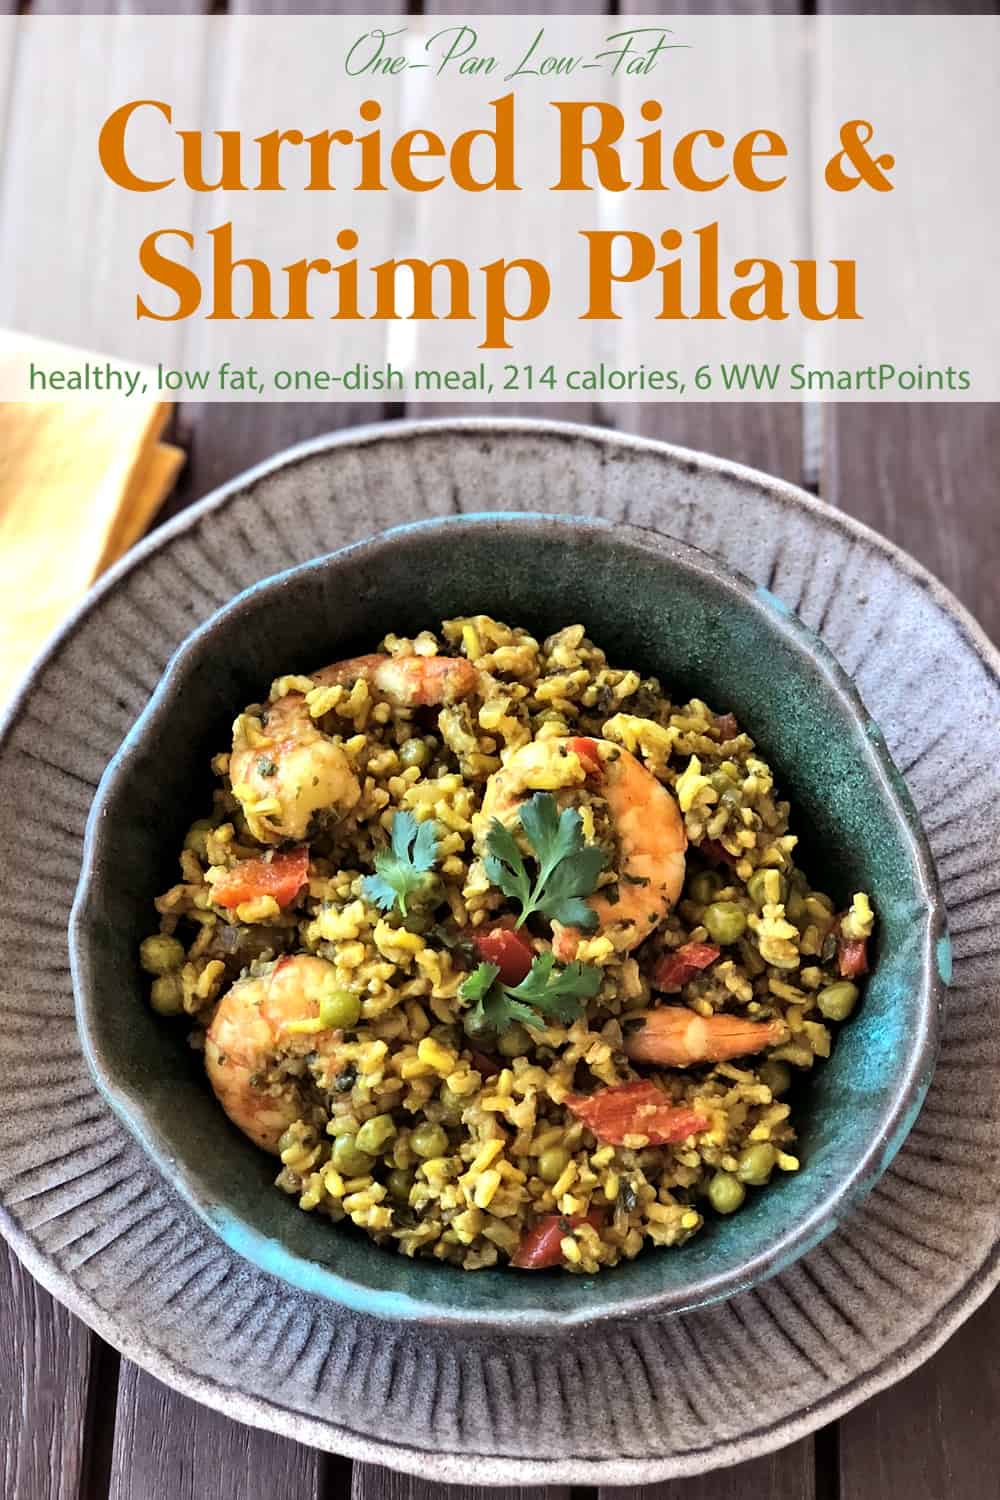 Curried rice shrimp pilau/pilaf in green ceramic dish on wooden table.